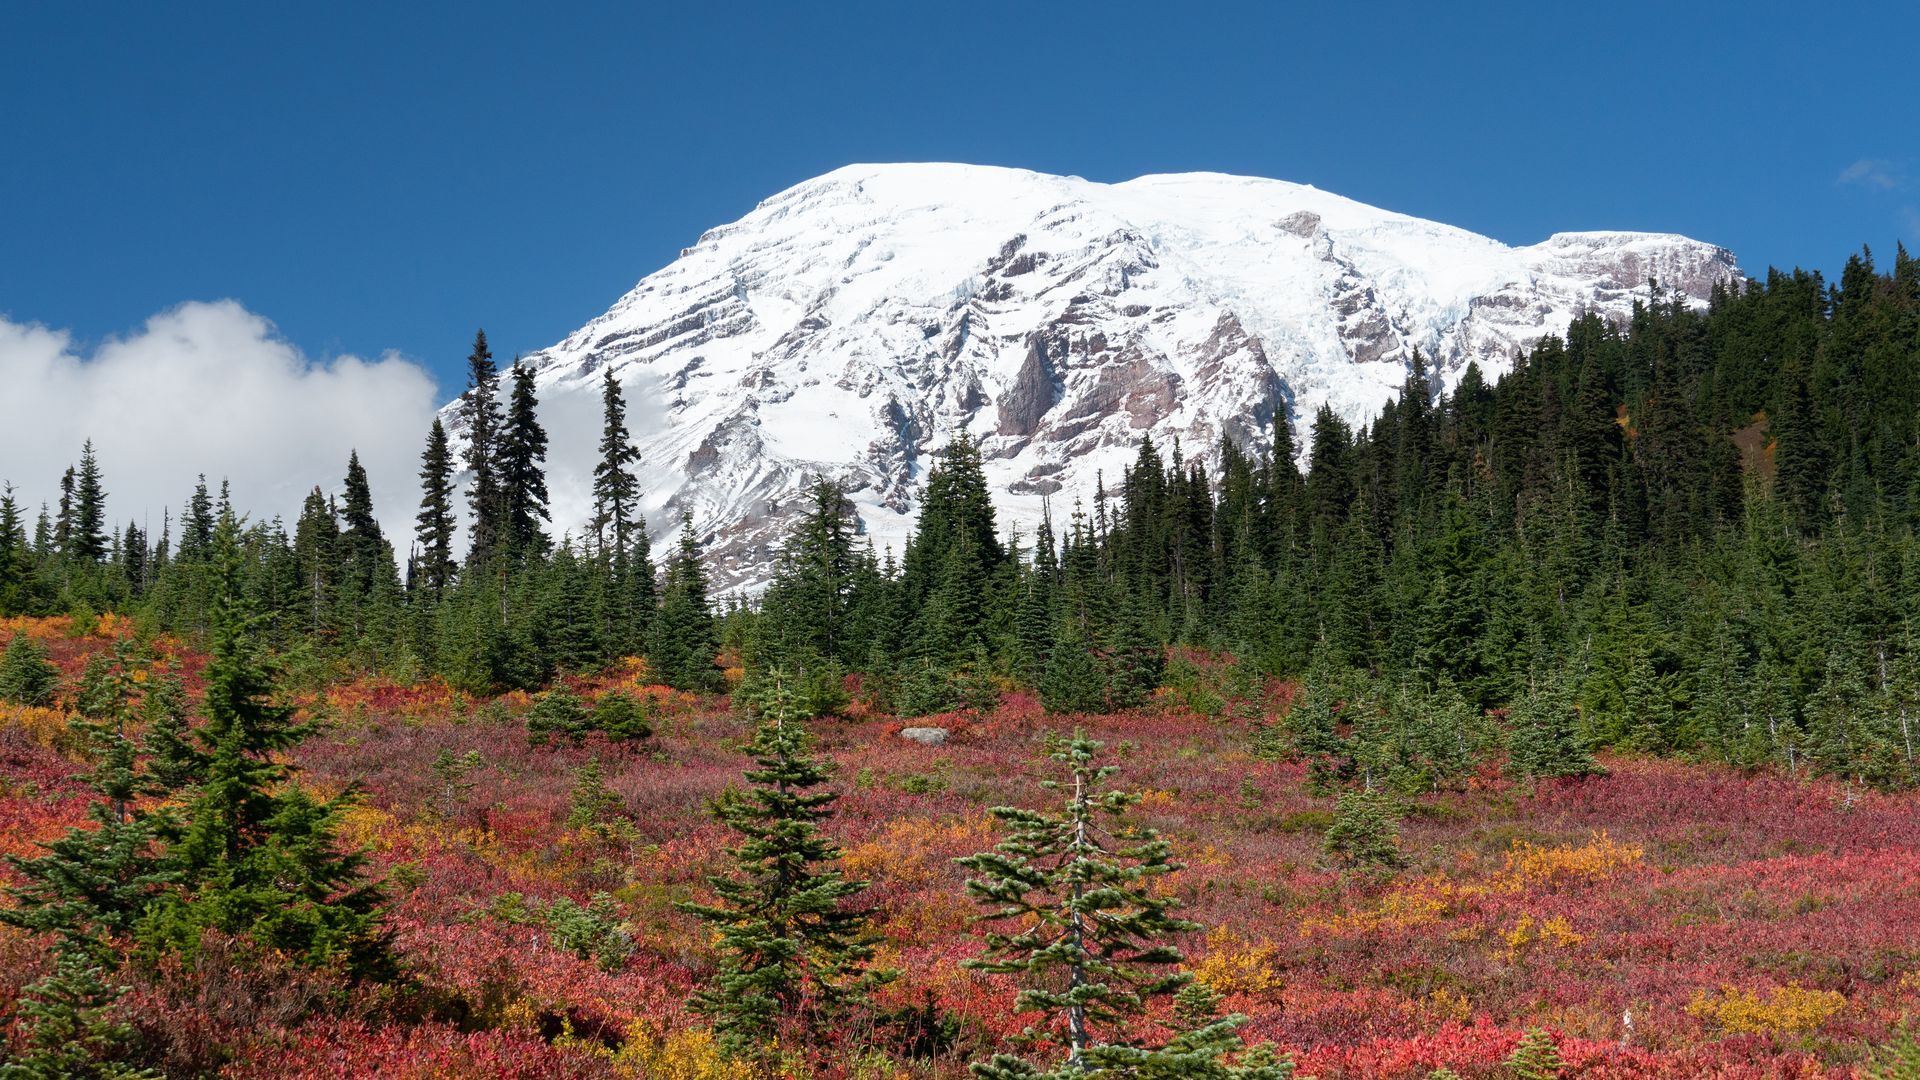 Mount Rainier is shown above the colorful meadows of Paradise, framed by evergreen trees and blue sky.